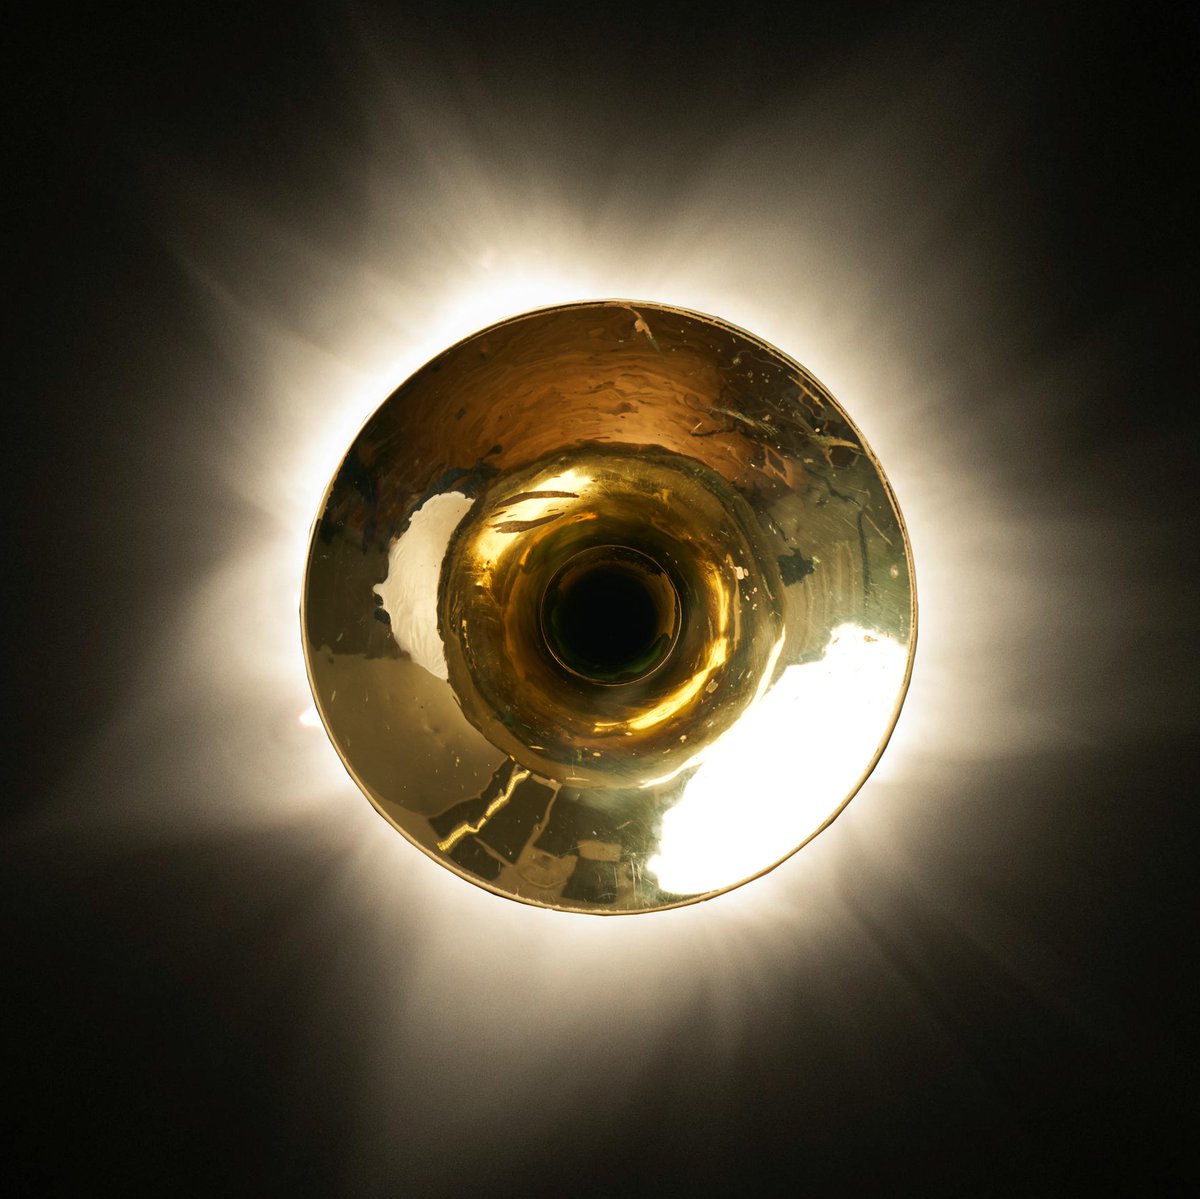 Made our own eclipse because the Scottish weather didn't play ball last night... #eclipse #scotland #frenchhorn